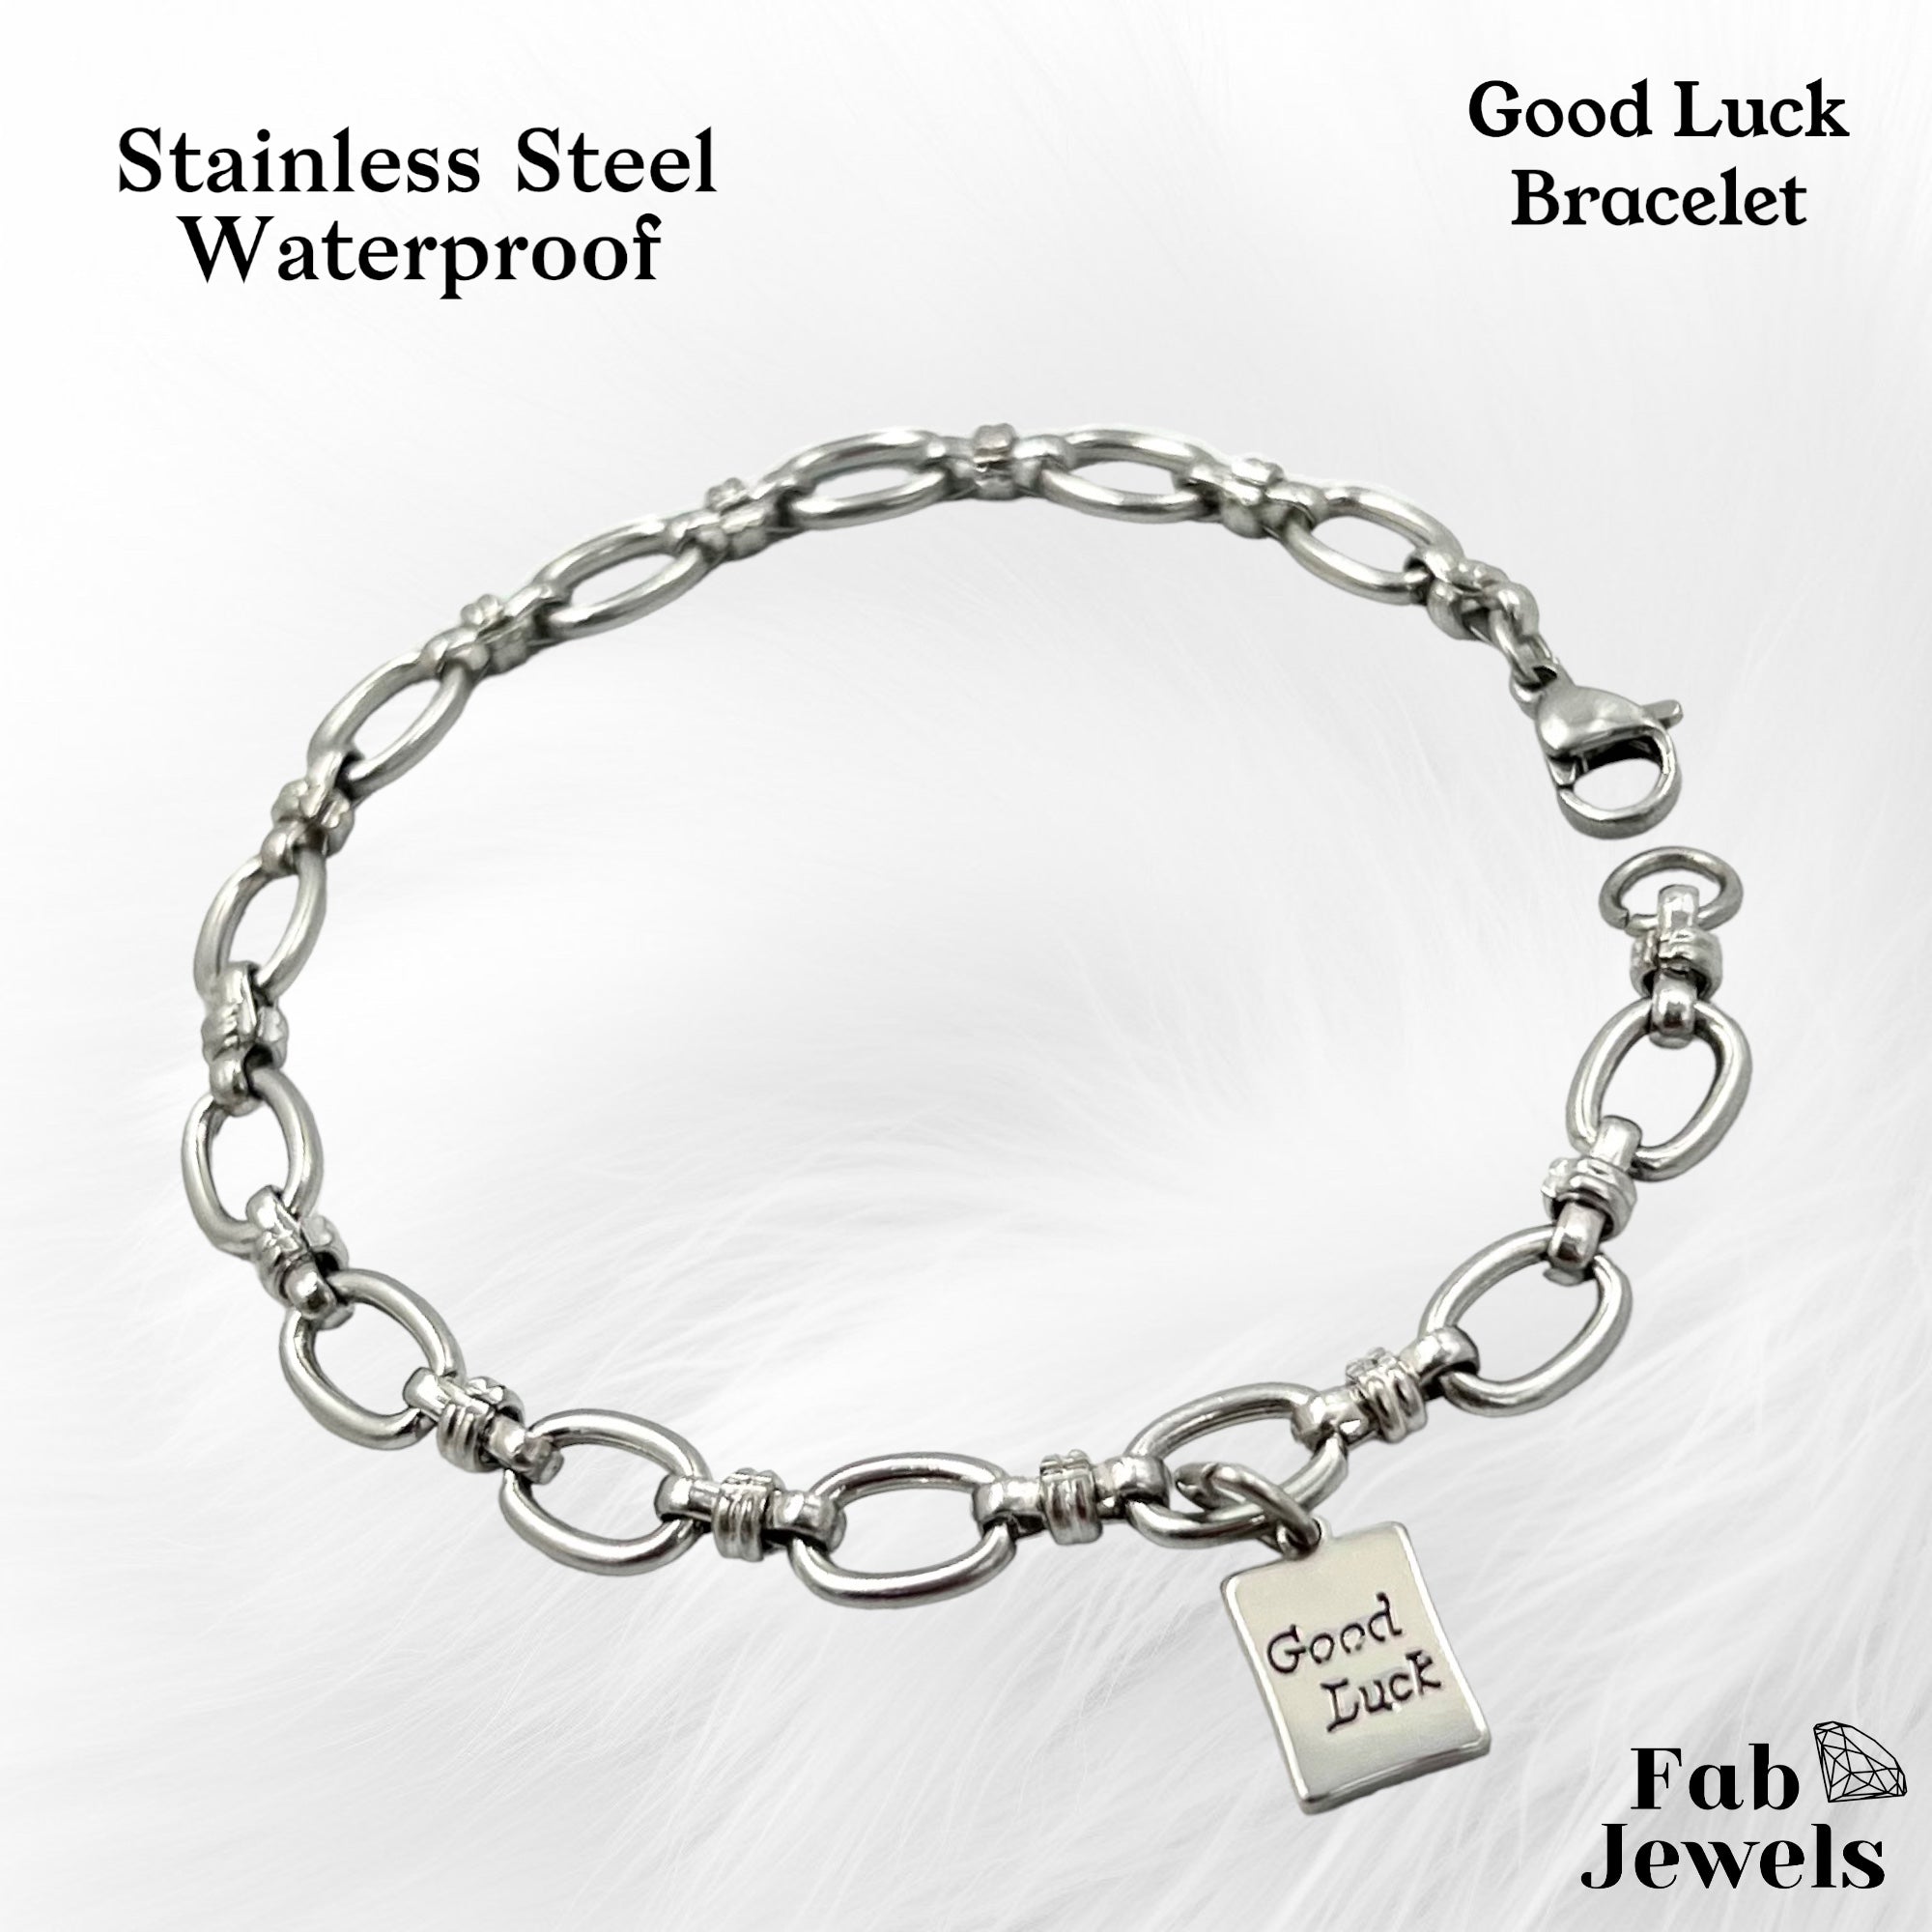 18 ct Gold Plated on Stainless Steel Silver Good Luck Charm Bracelet –  FabJewels 4less